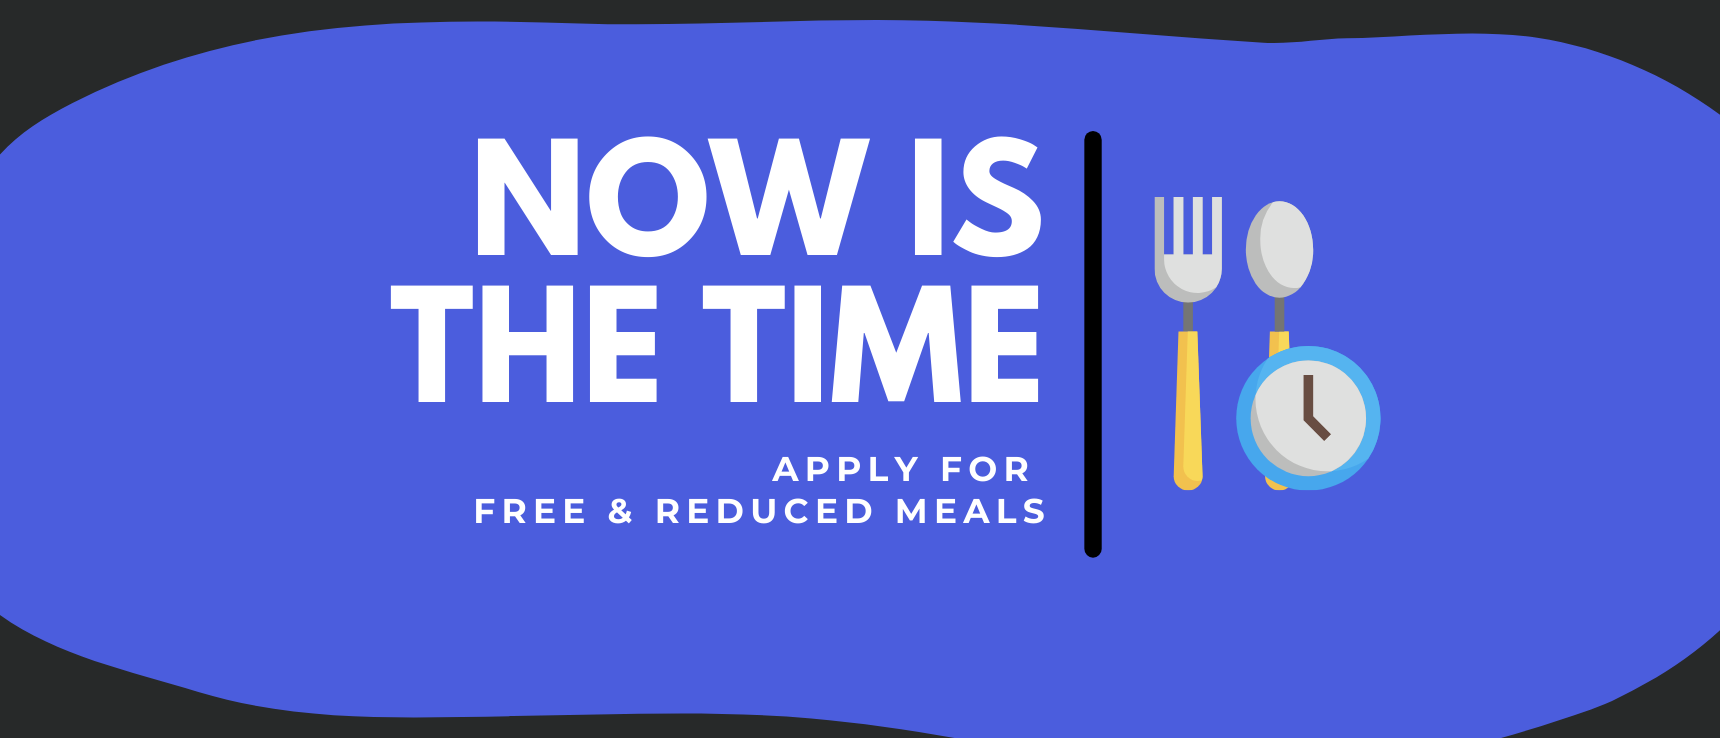 free & reduced meals application banner